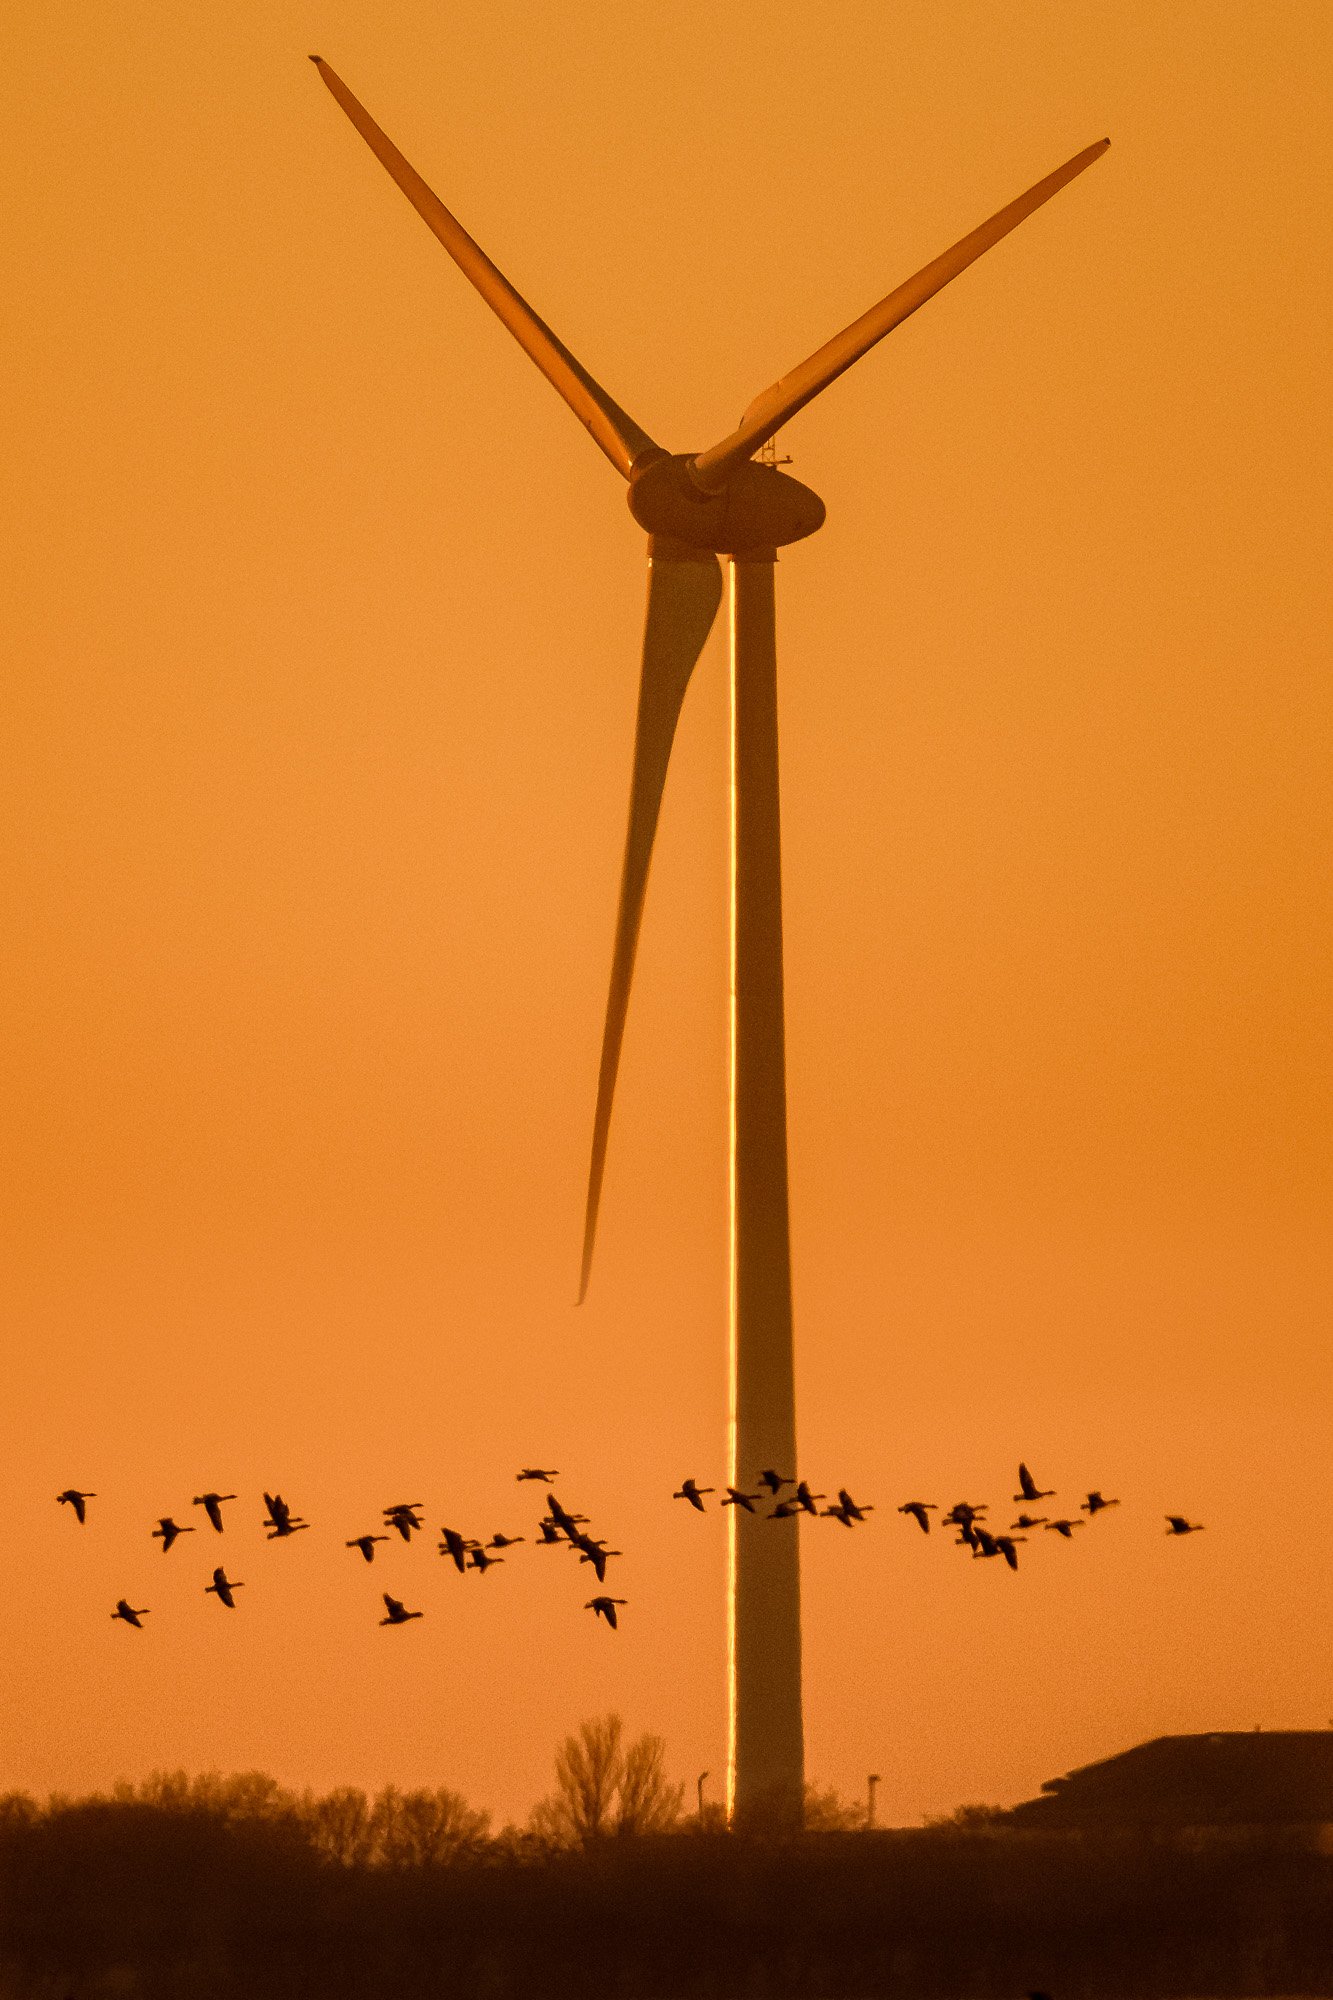 Geese pass in front of a wind turbine at sunset